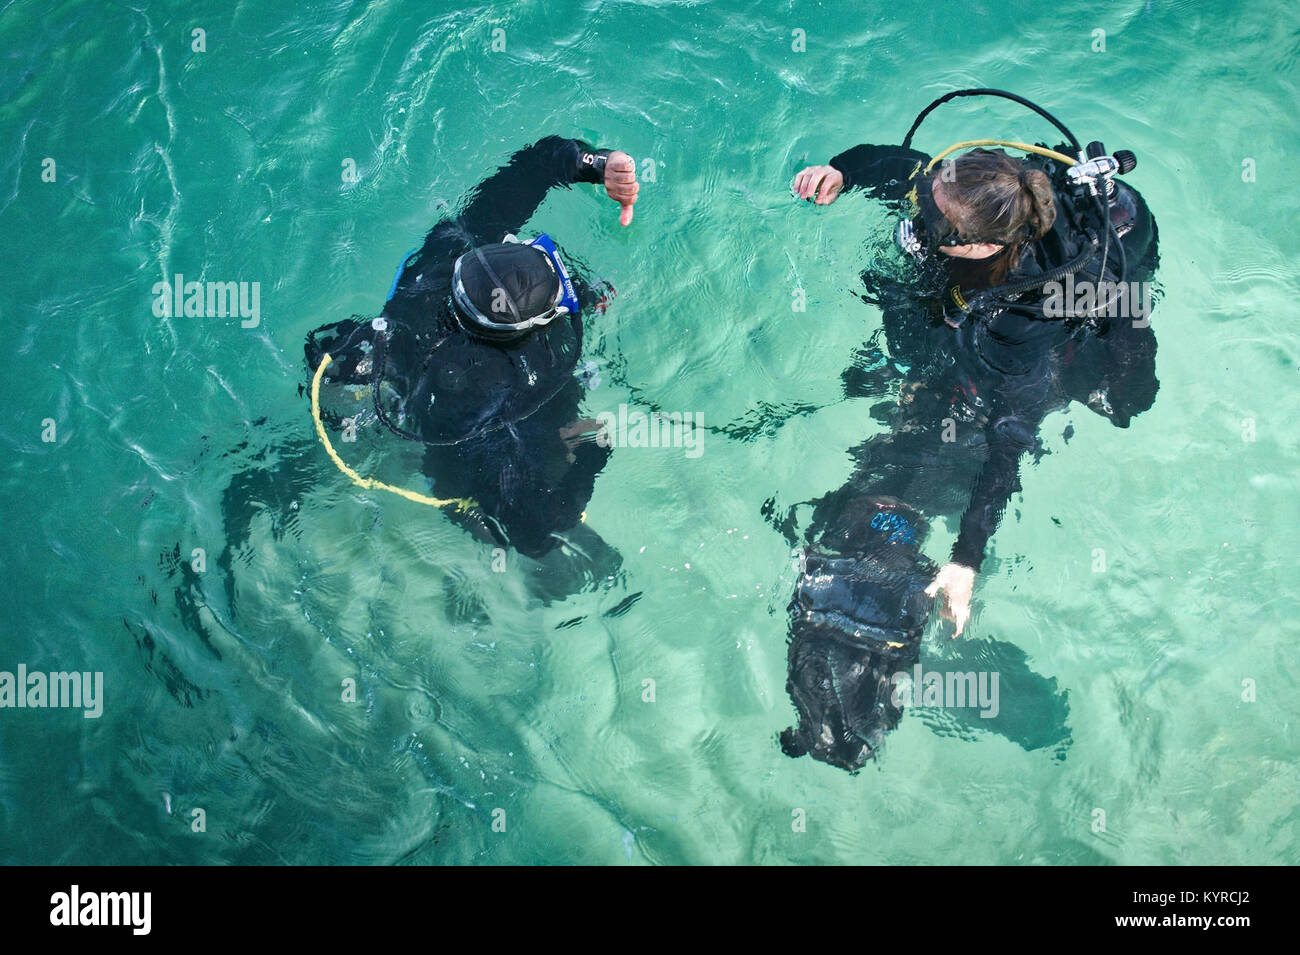 Mohammed Al-Ahmad Naval Base, KUWAIT (Jan. 8, 2018) Explosive Ordnance Disposal Technician 3rd Class Carolyn Willeford, right, assigned to Commander, Task Group 56.1, performs in-water checks during a scuba dive with a Kuwait Naval Force explosive ordnance disposal technician during a training evolution as part of exercise Eager Response 18. Eager Response 18 is a bilateral explosive ordnance disposal military exercise between the State of Kuwait and the United States. The exercise fortifies military-to-military relationships between the Kuwait Naval Force and U.S. Navy, advances the operation Stock Photo